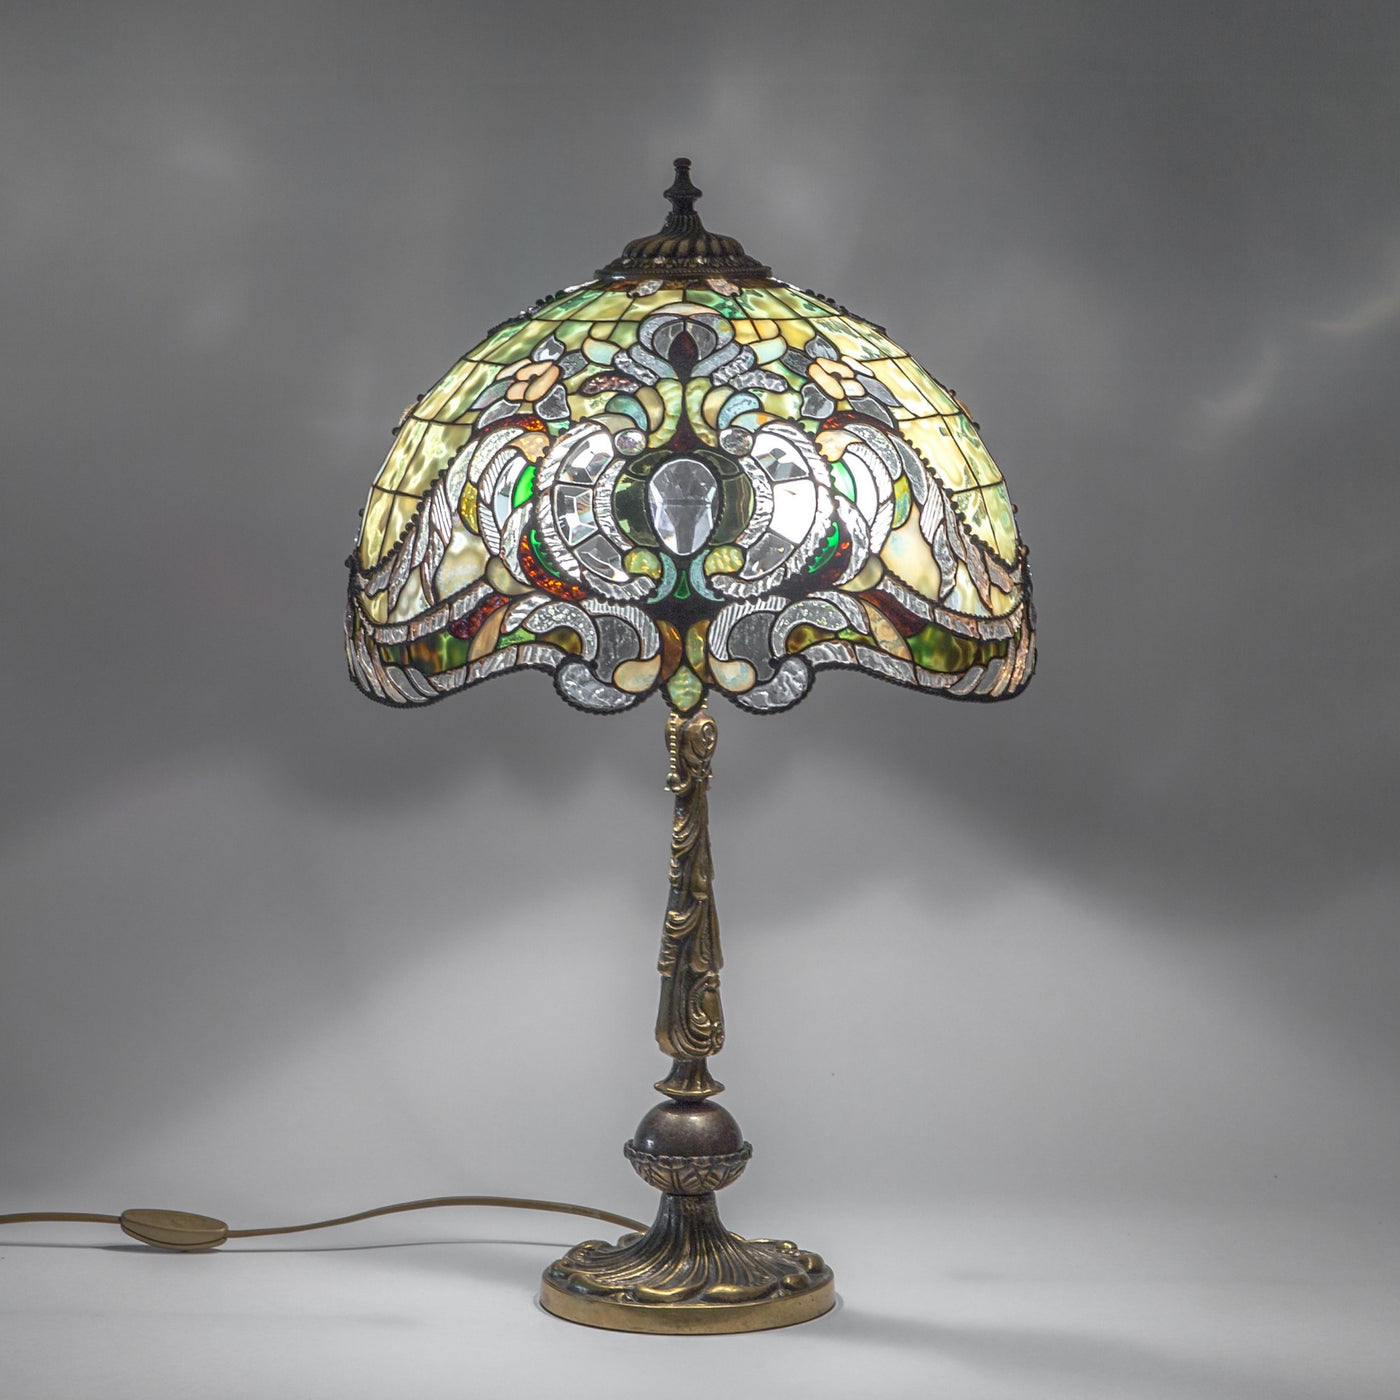 Lit stained glass green Tiffany lampshade with bronze base with engraving